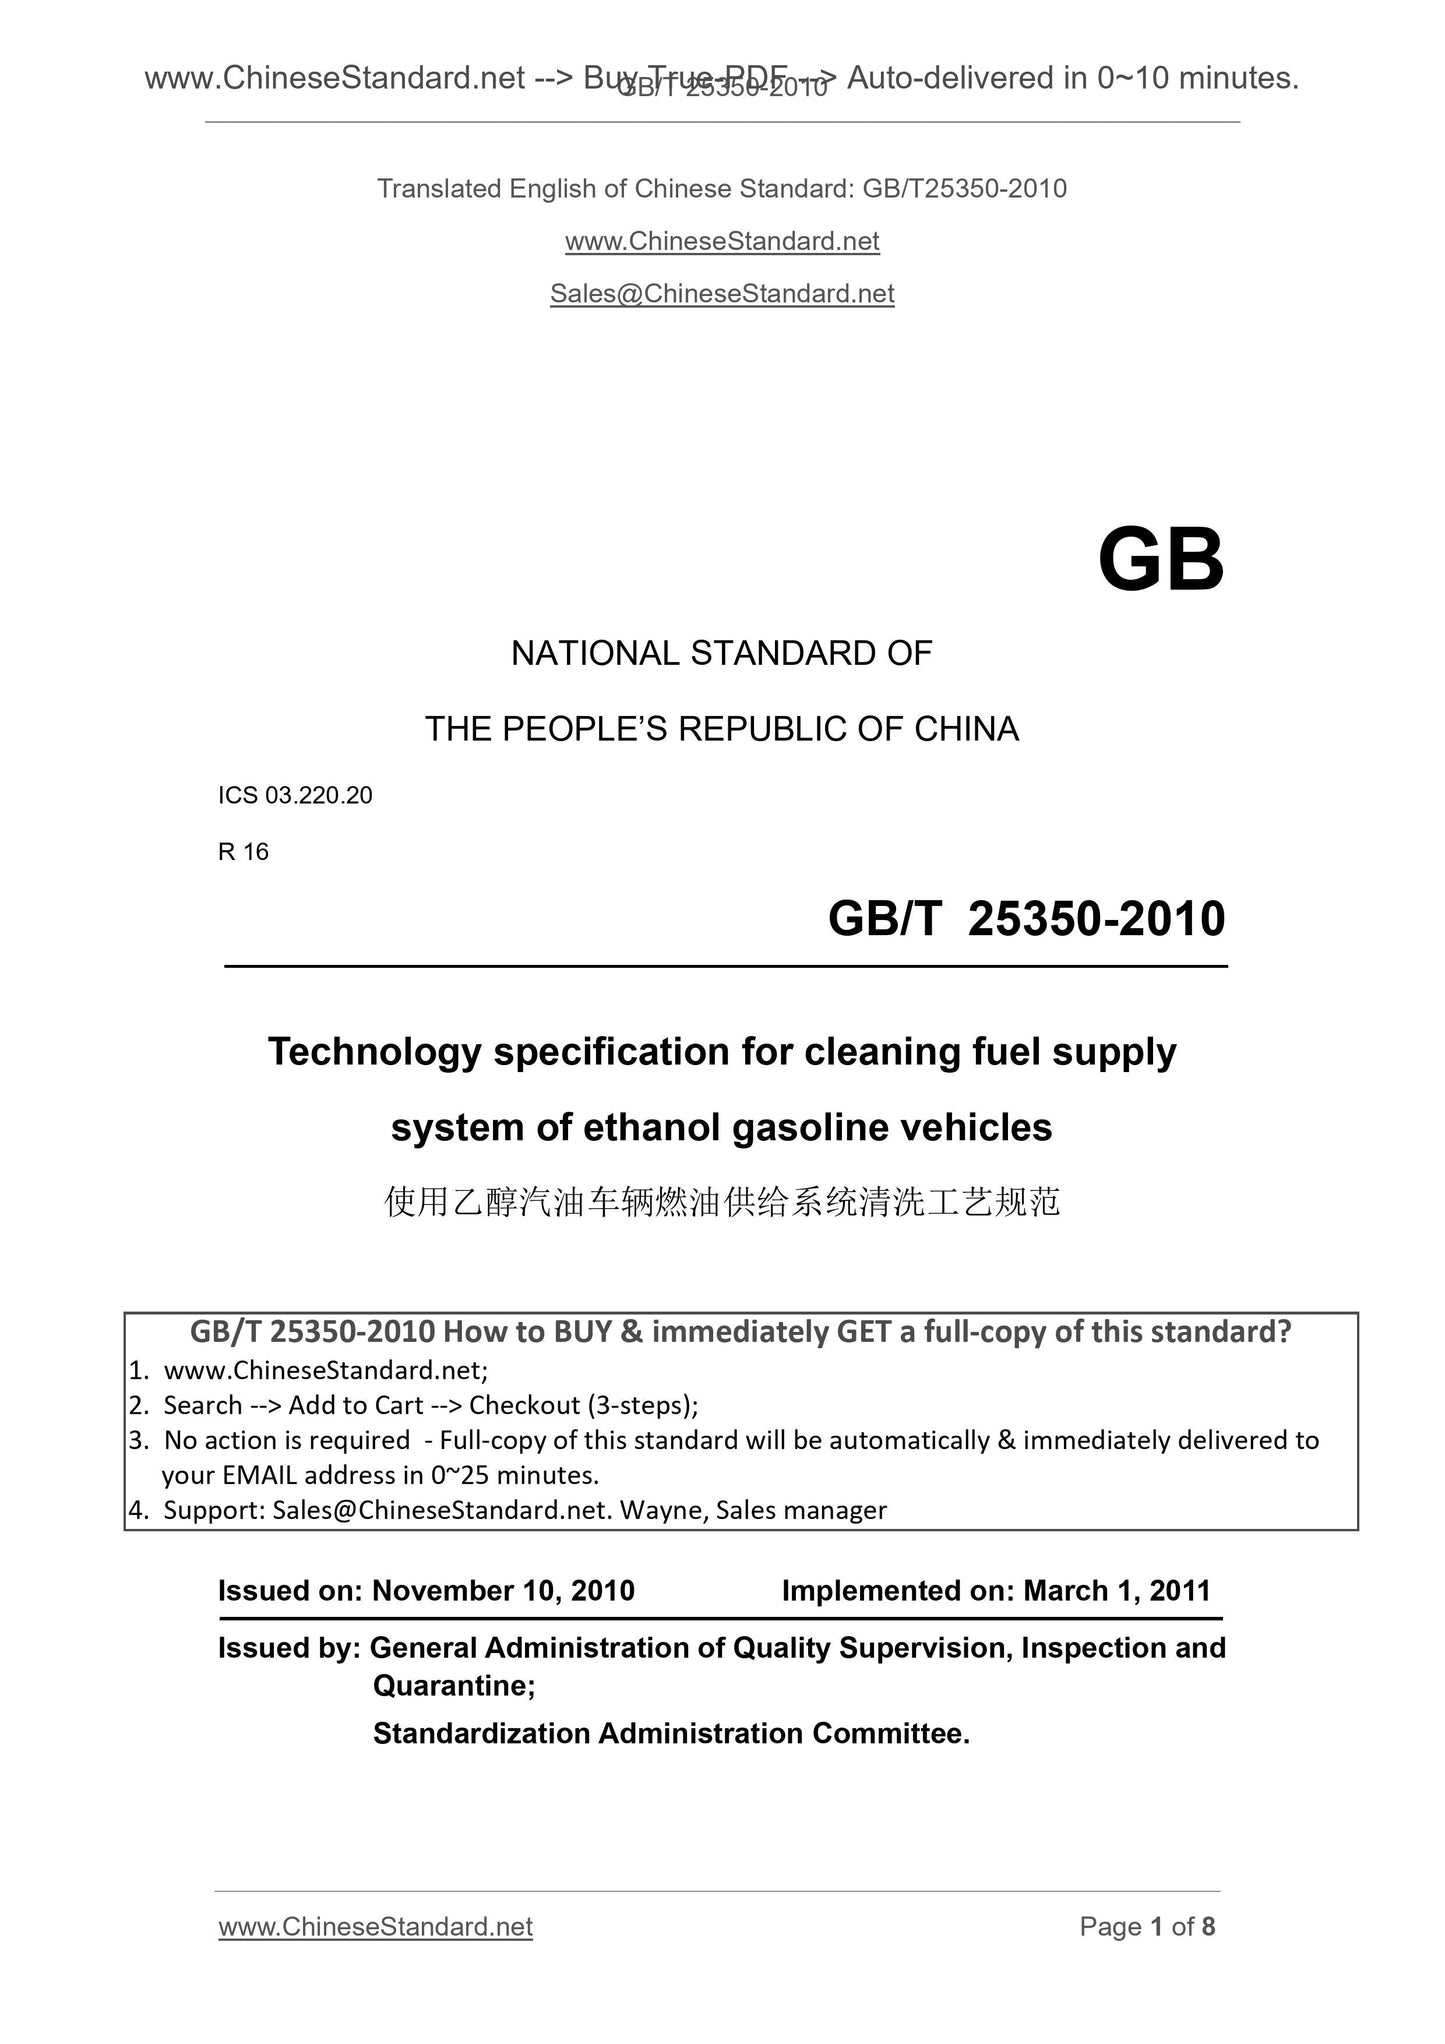 GB/T 25350-2010 Page 1